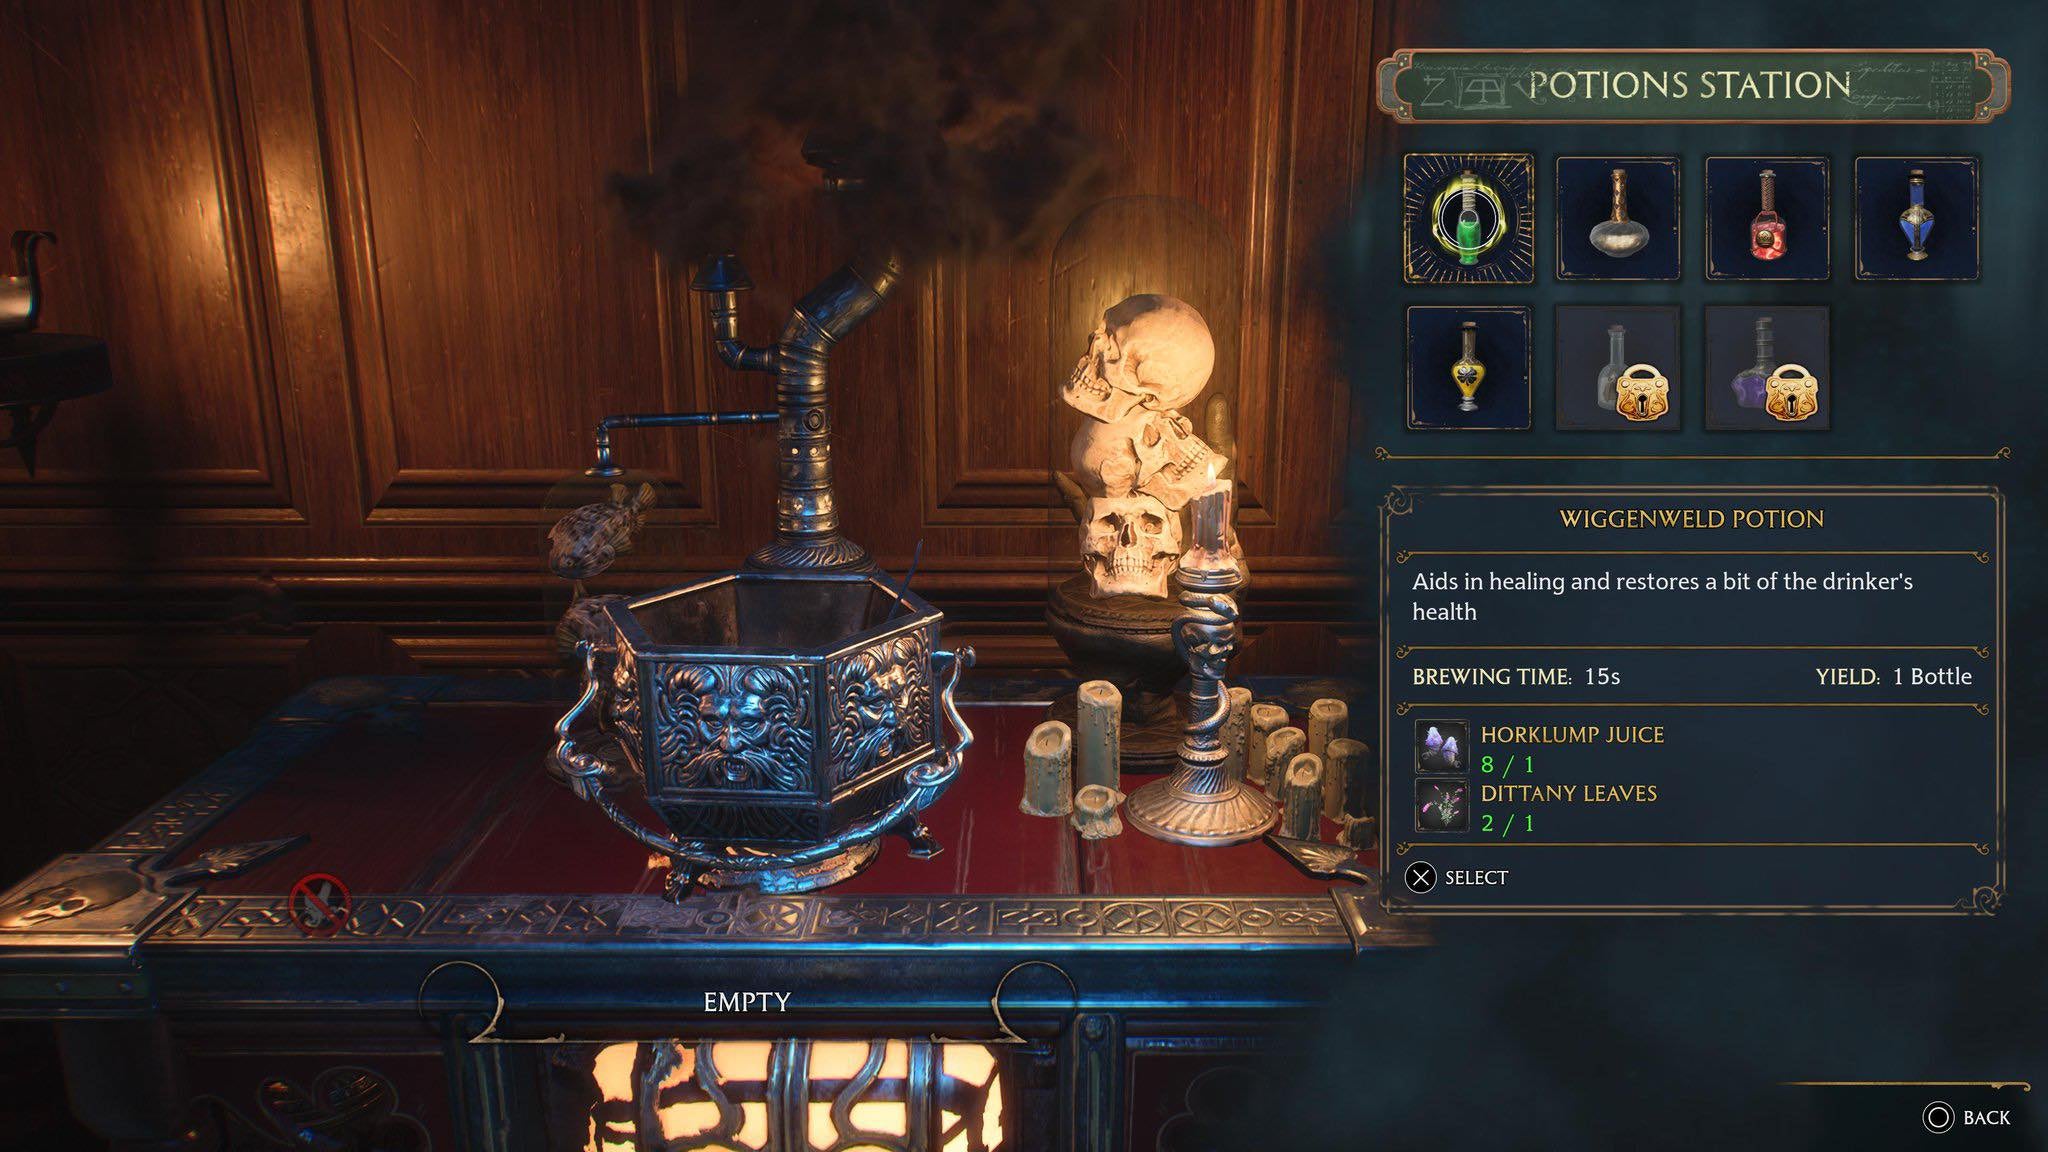 Showing the necessary ingredients to brew a Wiggenweld Potion.